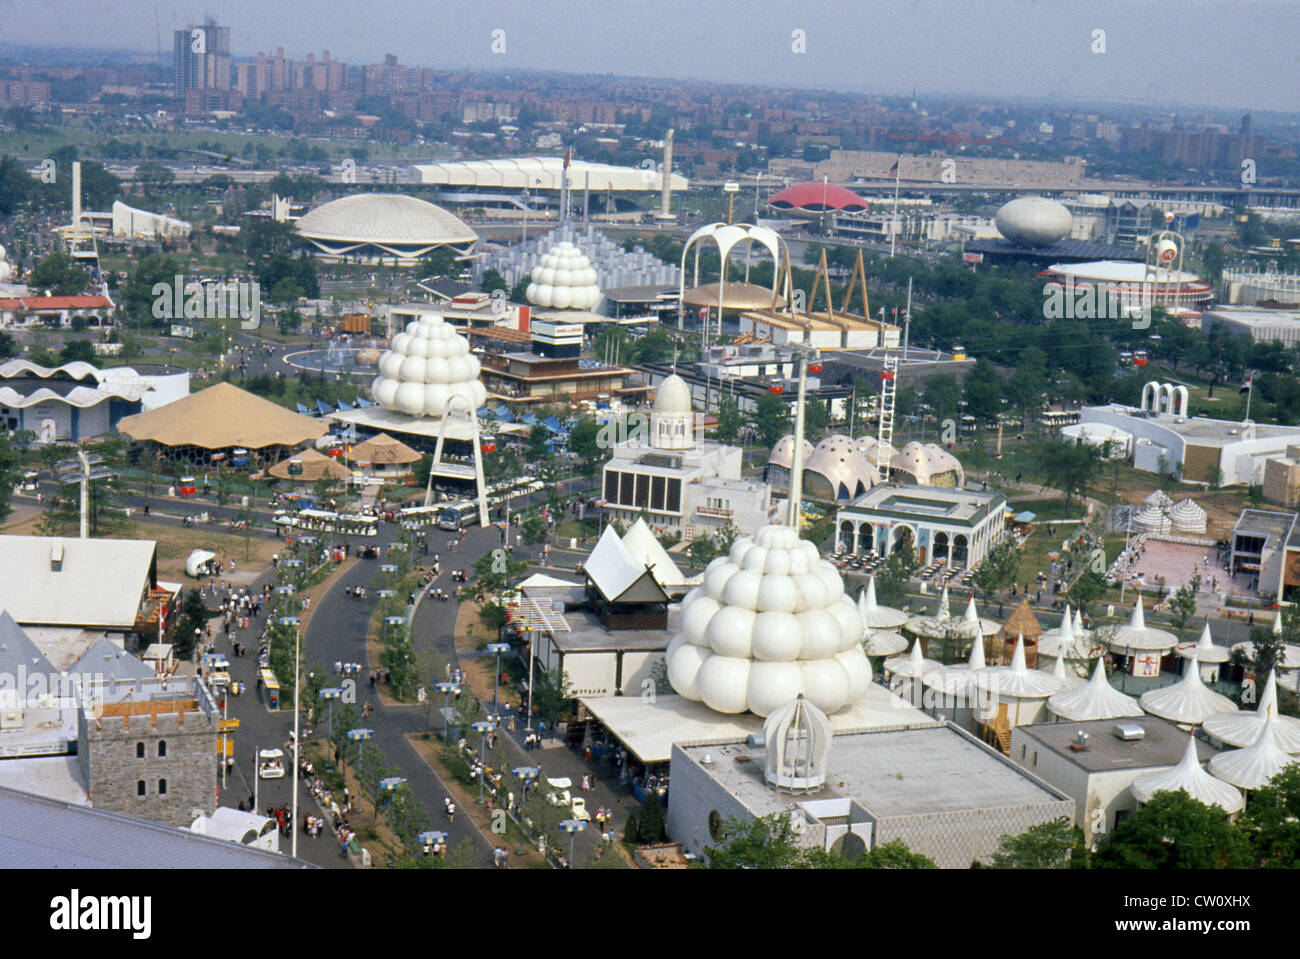 Original photograph taken in 1964. 1964 New York World's Fair, aerial view from the New York Pavilion. Stock Photo